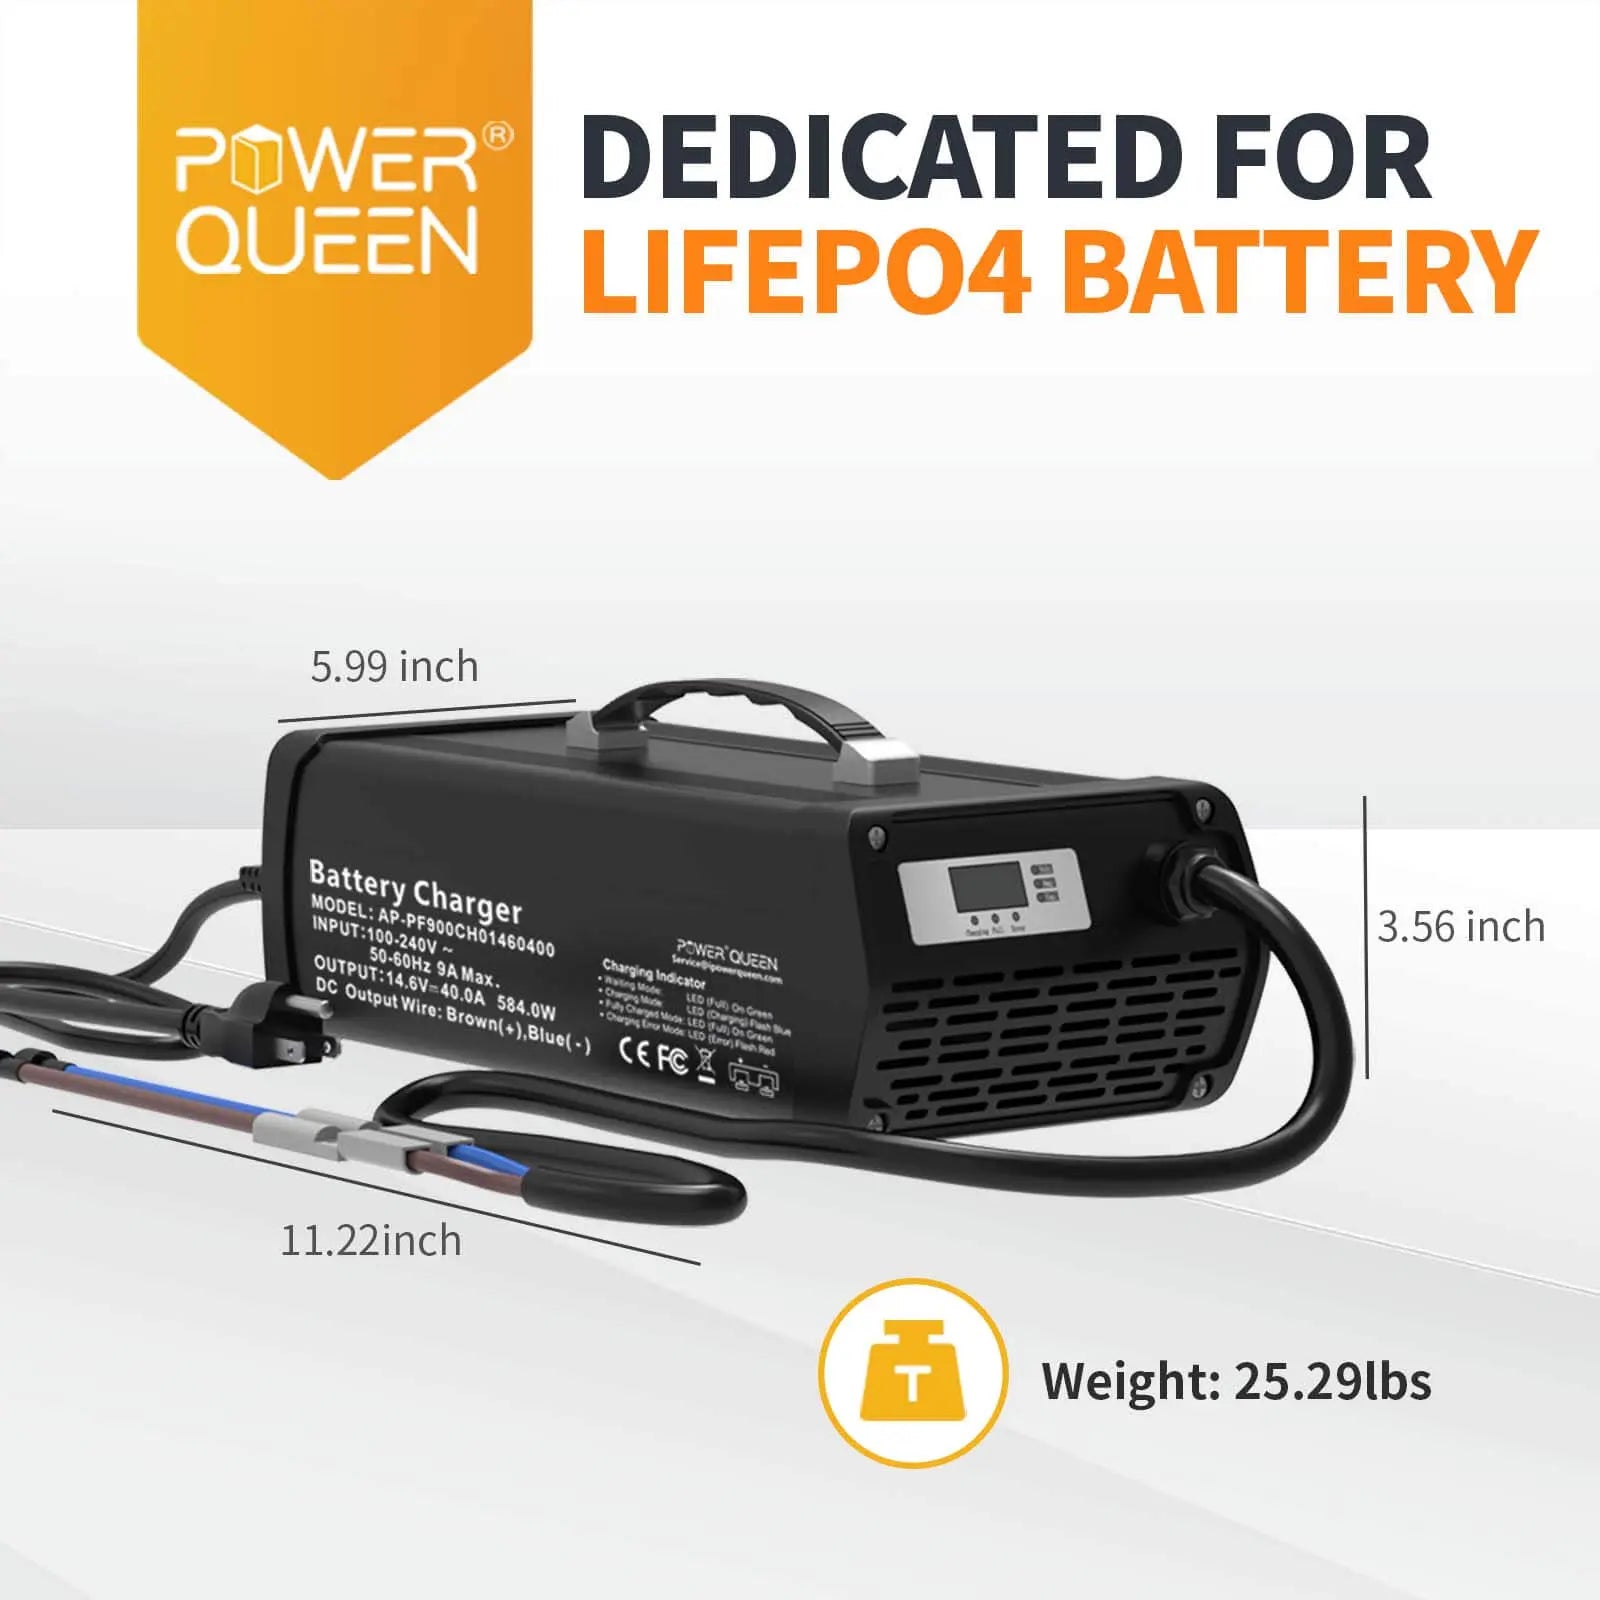 Power Queen 14.6V 40A LiFePO4 Battery Charger Power Queen